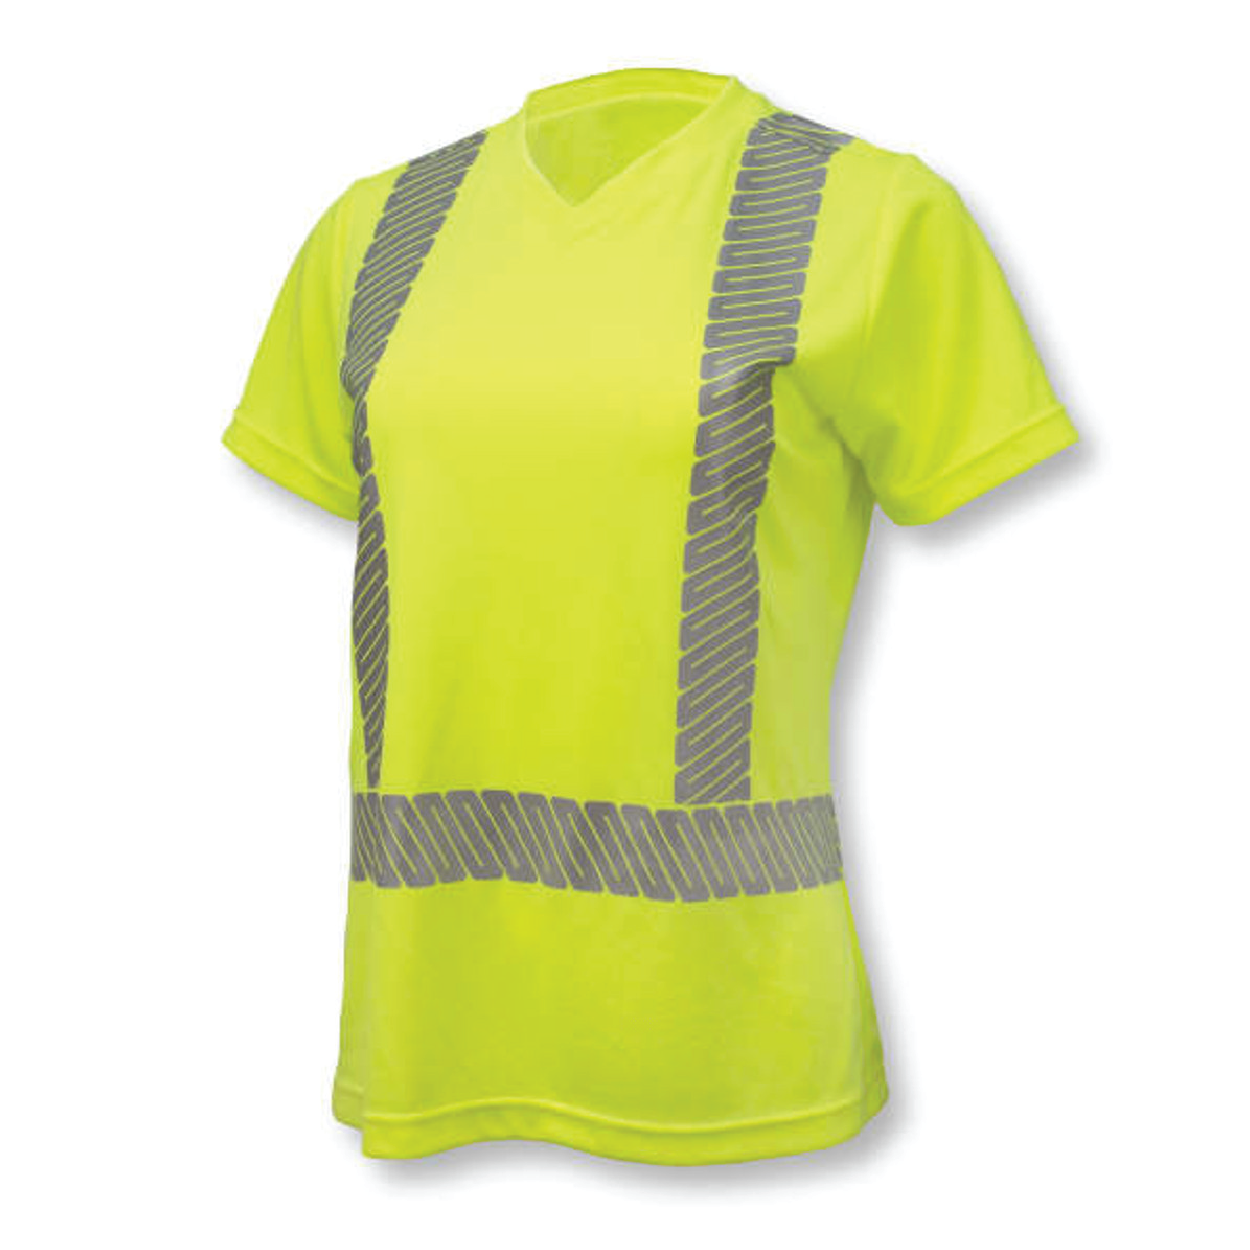 Women's Breathable High-Visibility Safety Shirts